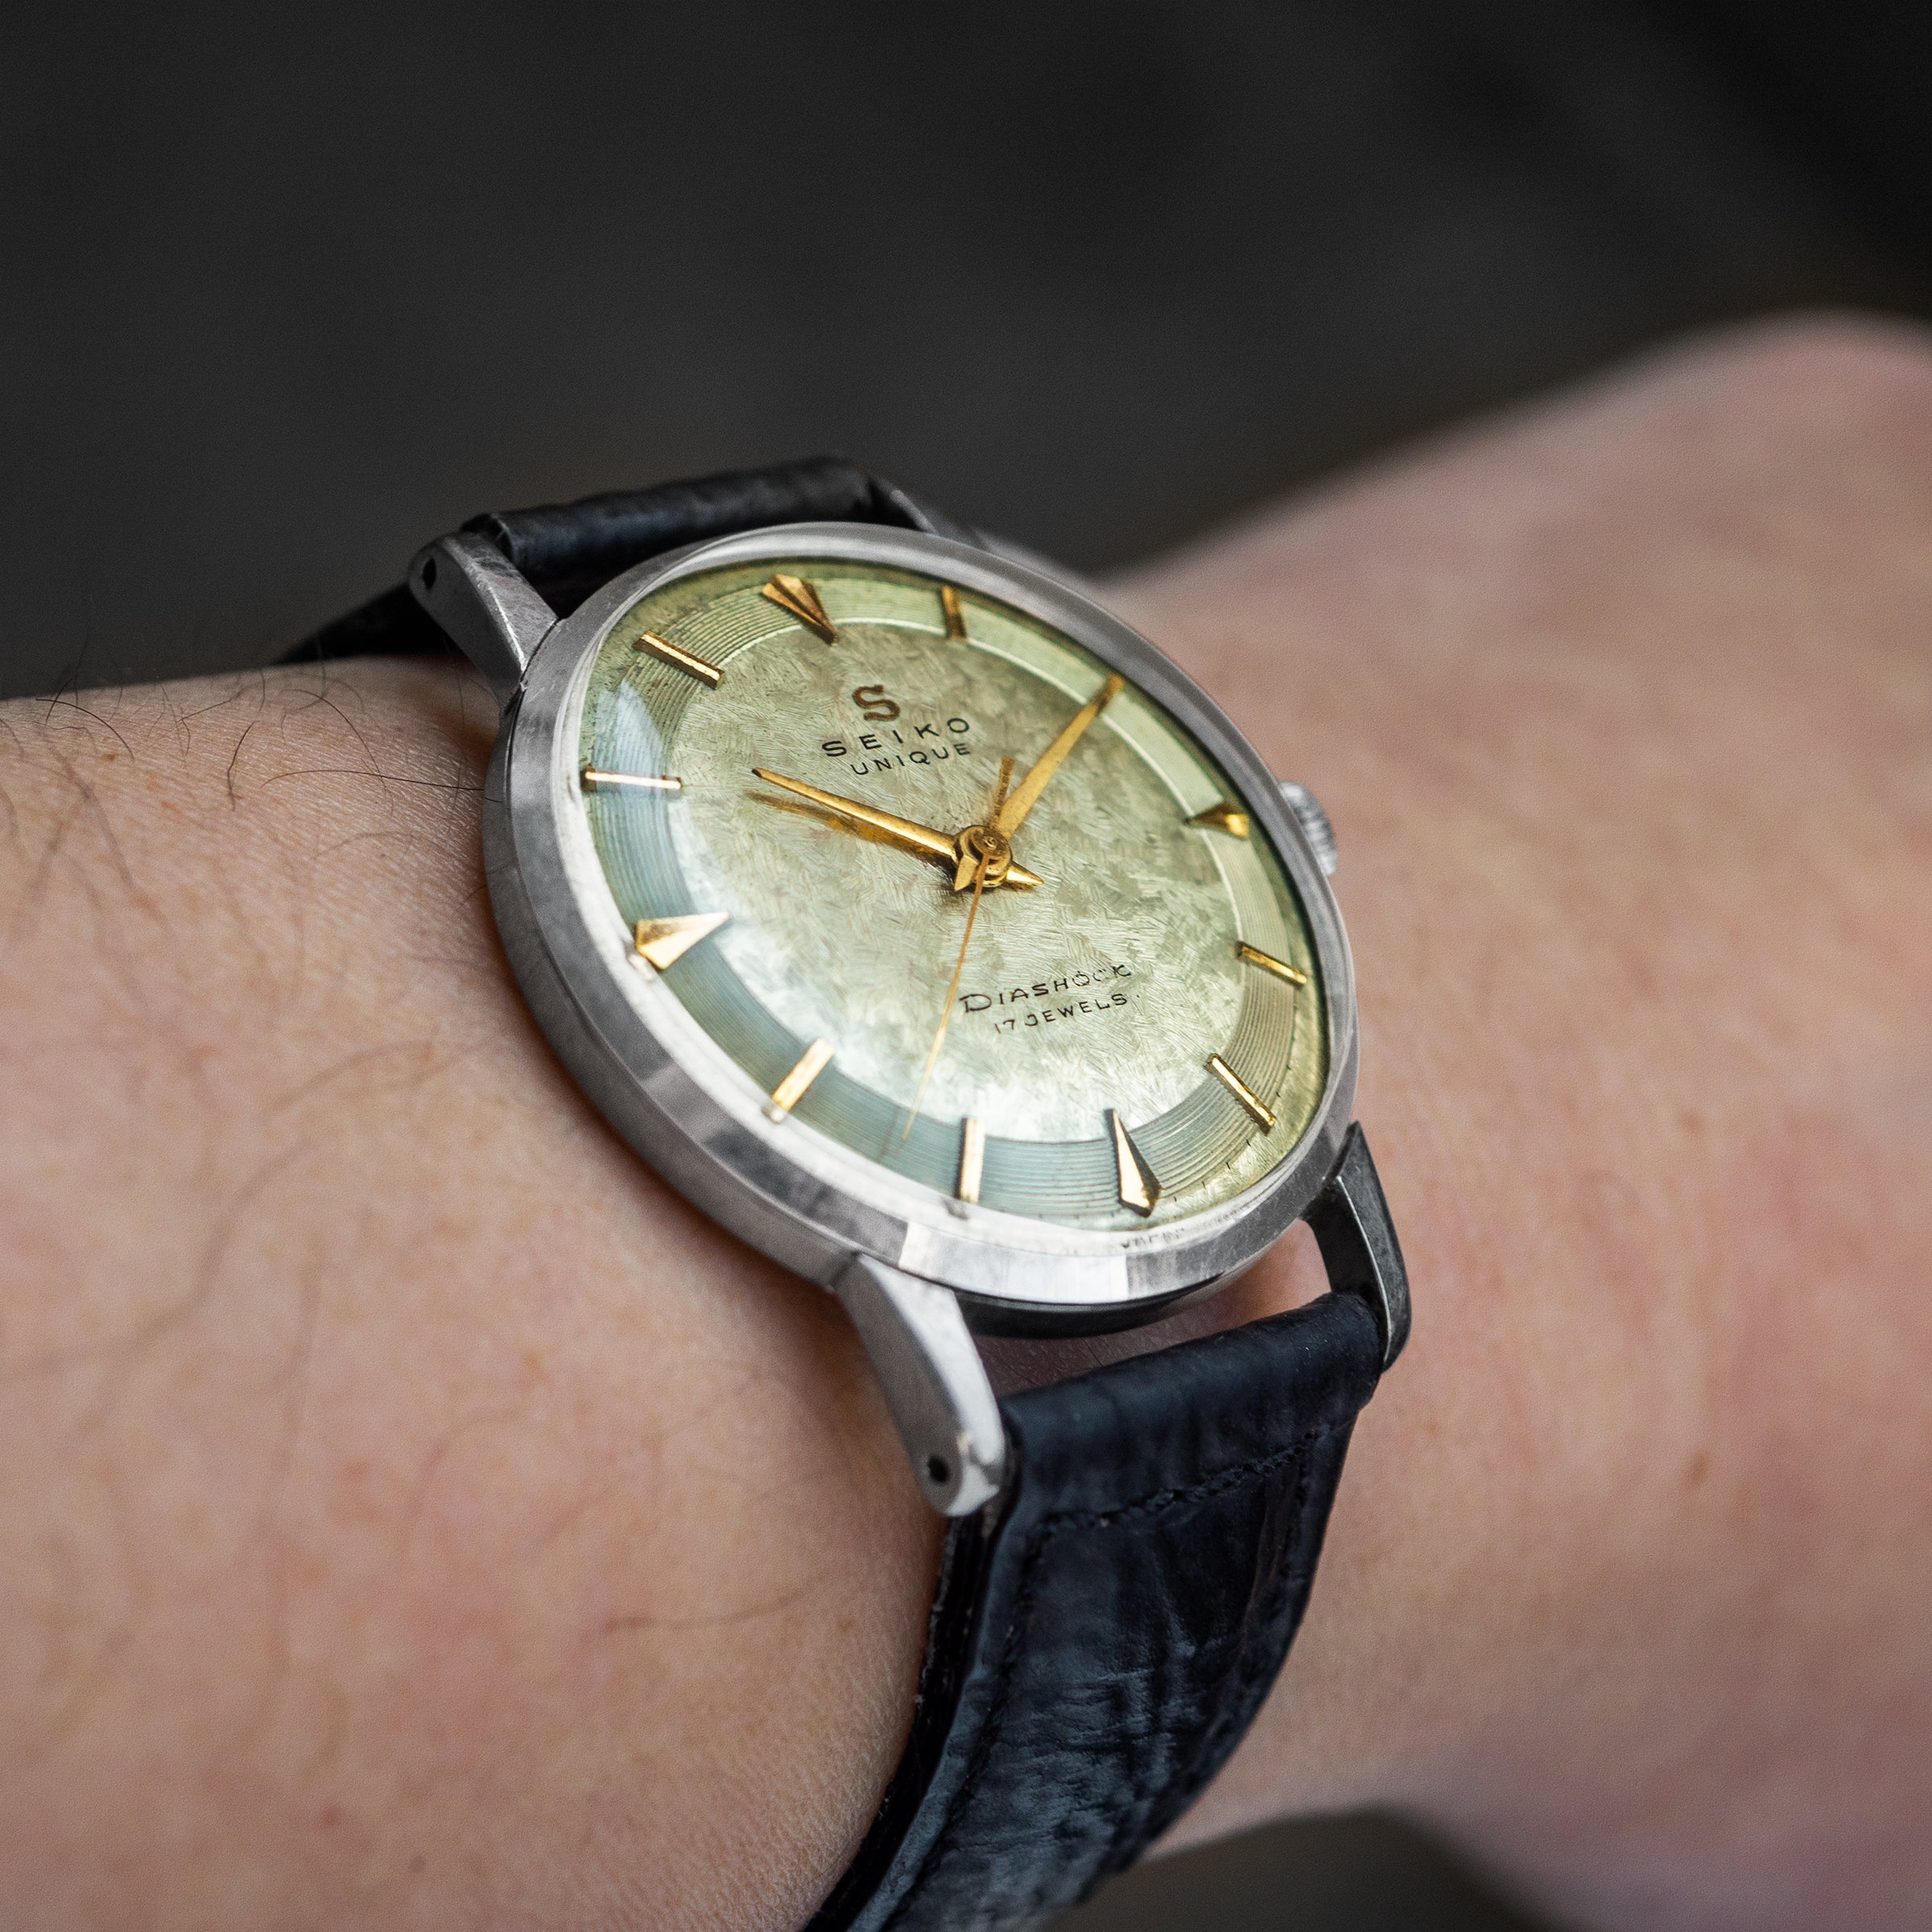 No. 532A / Seiko Unique - 1958 – From Time To Times